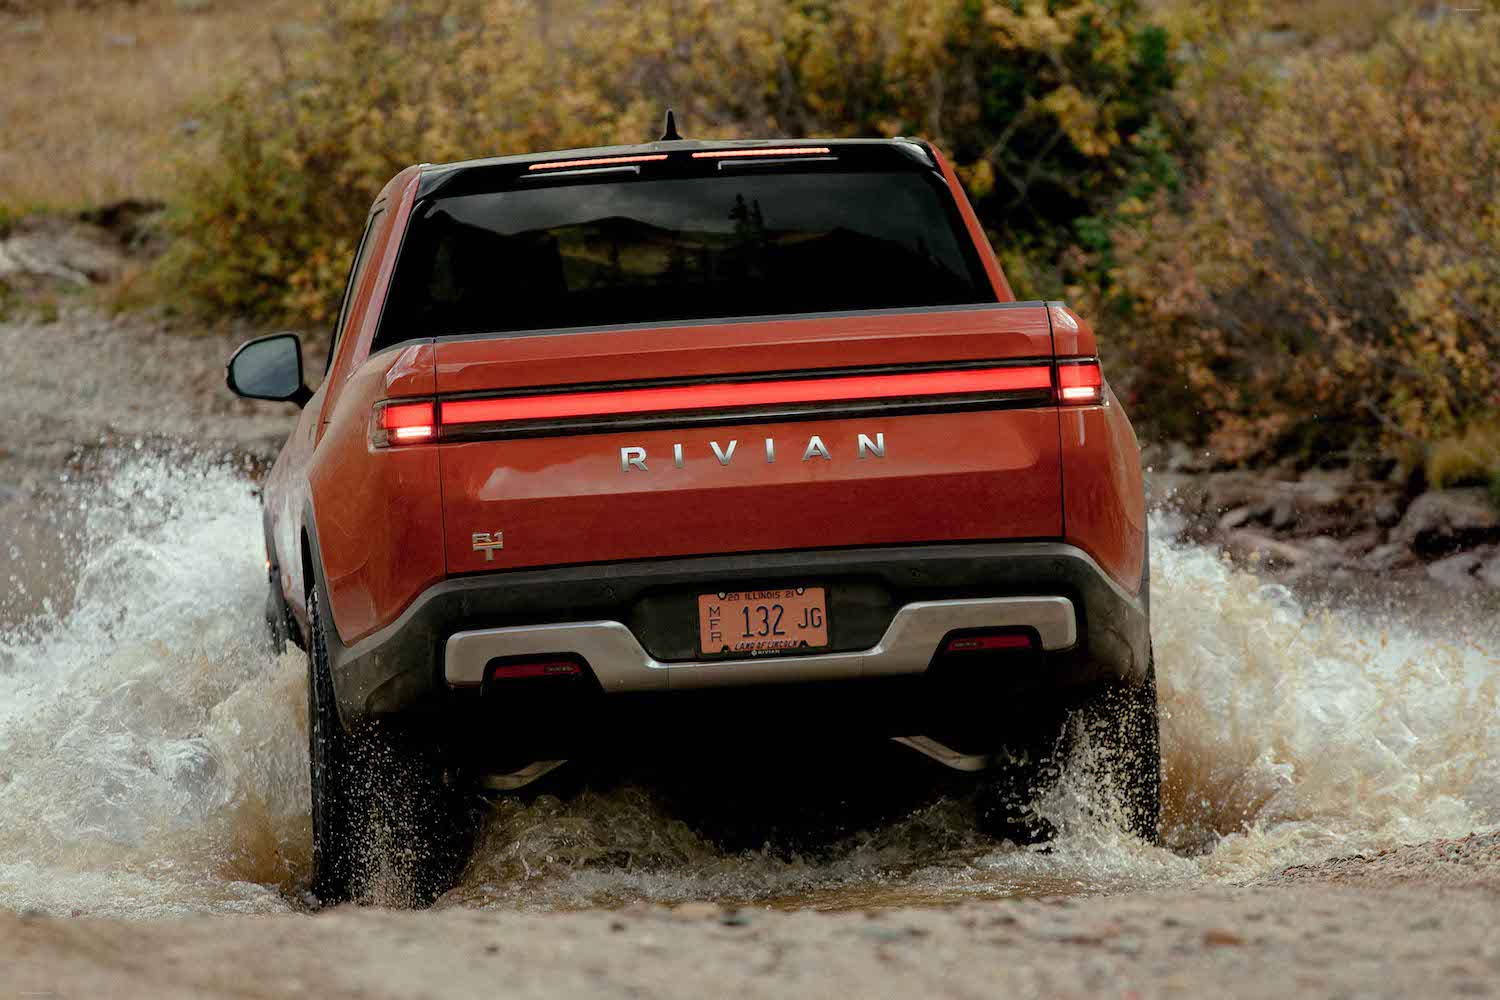 Red Rivian R1T electric pickup truck driving through a river, a field visible beyond it.